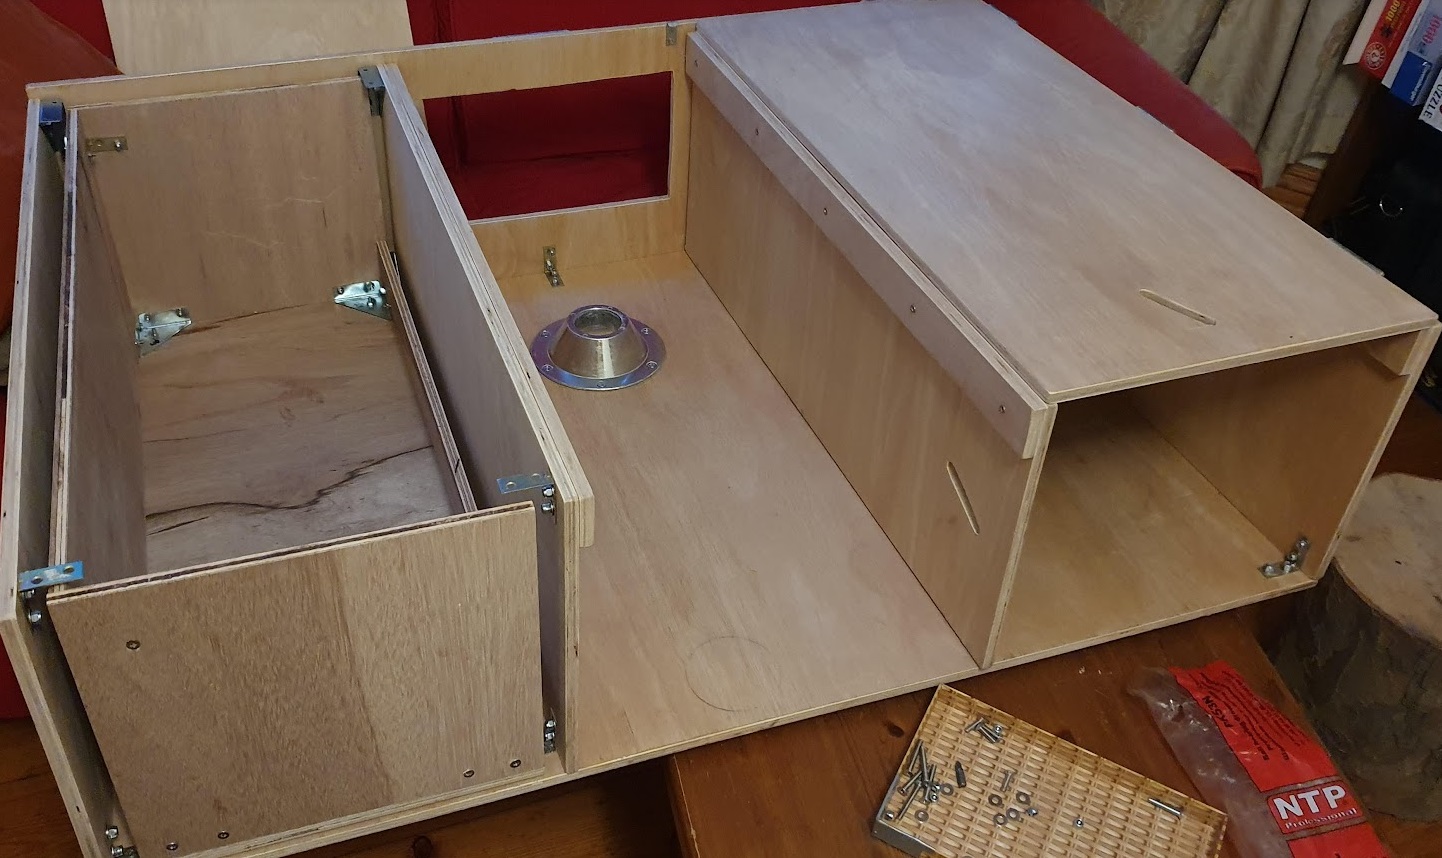 Assembly of the kitchen drawer